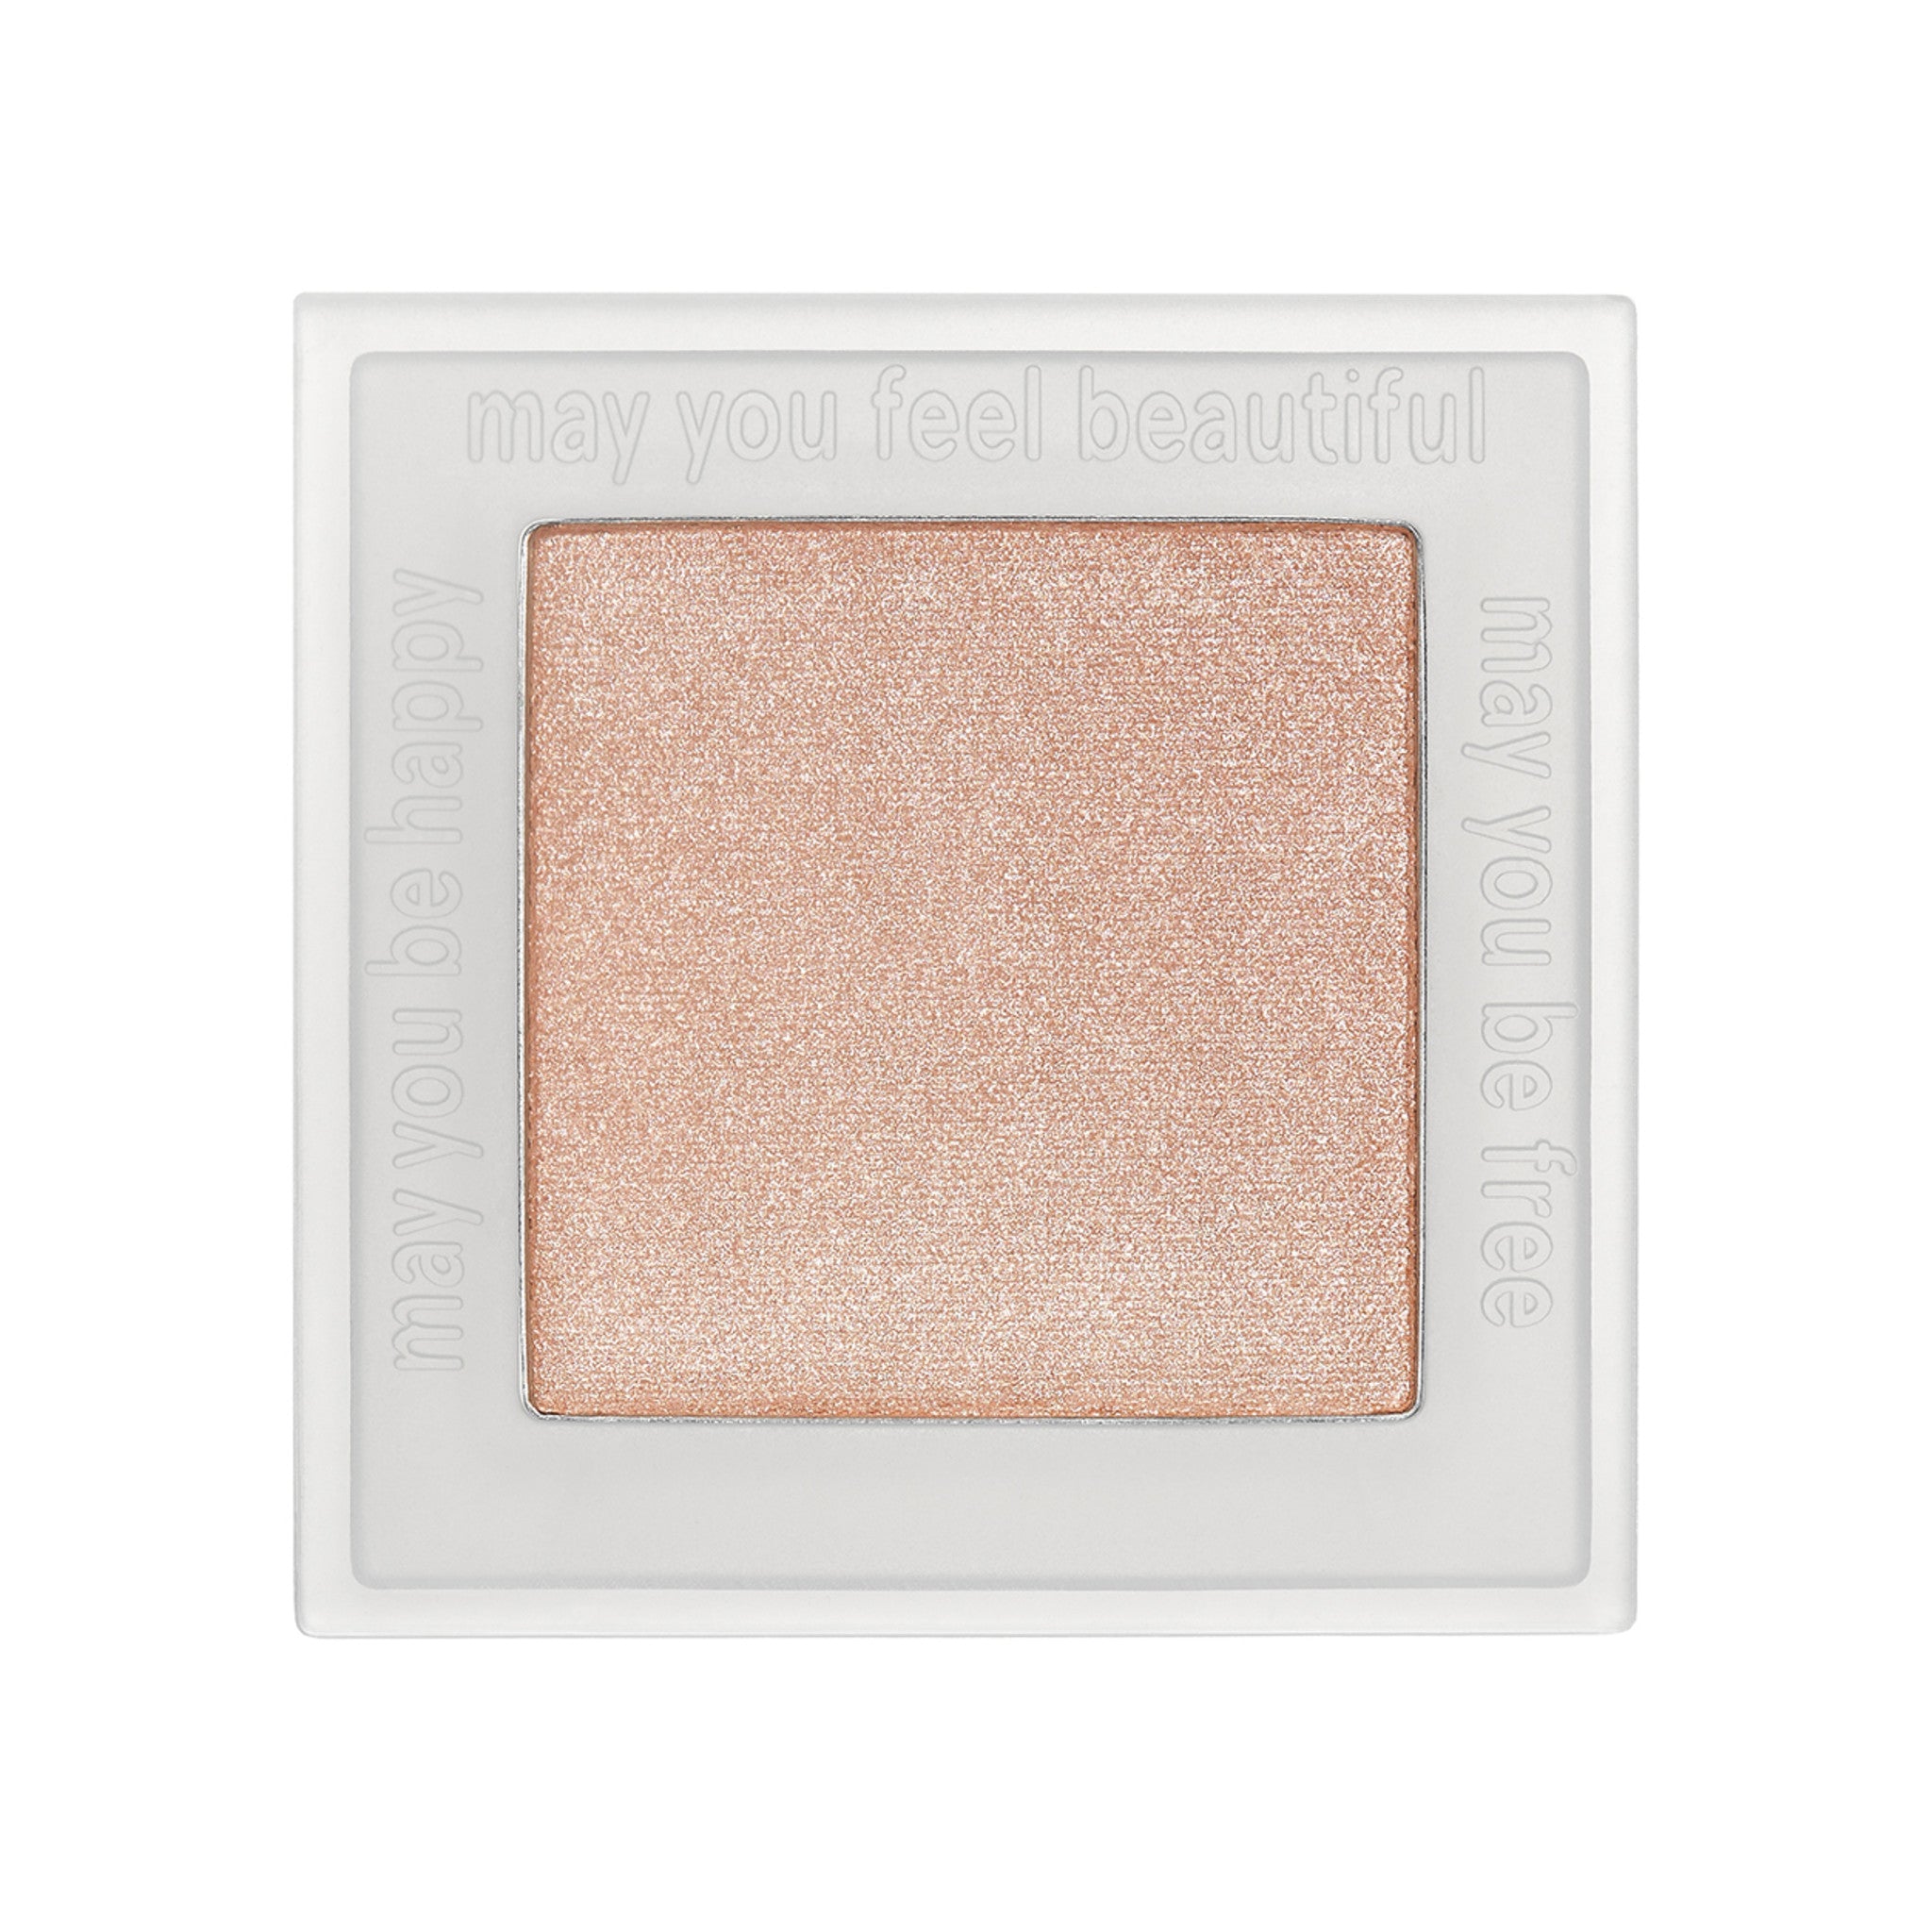 Neen Pretty Shady Pressed Pigment Color/Shade variant: Beam main image. This product is in the color nude